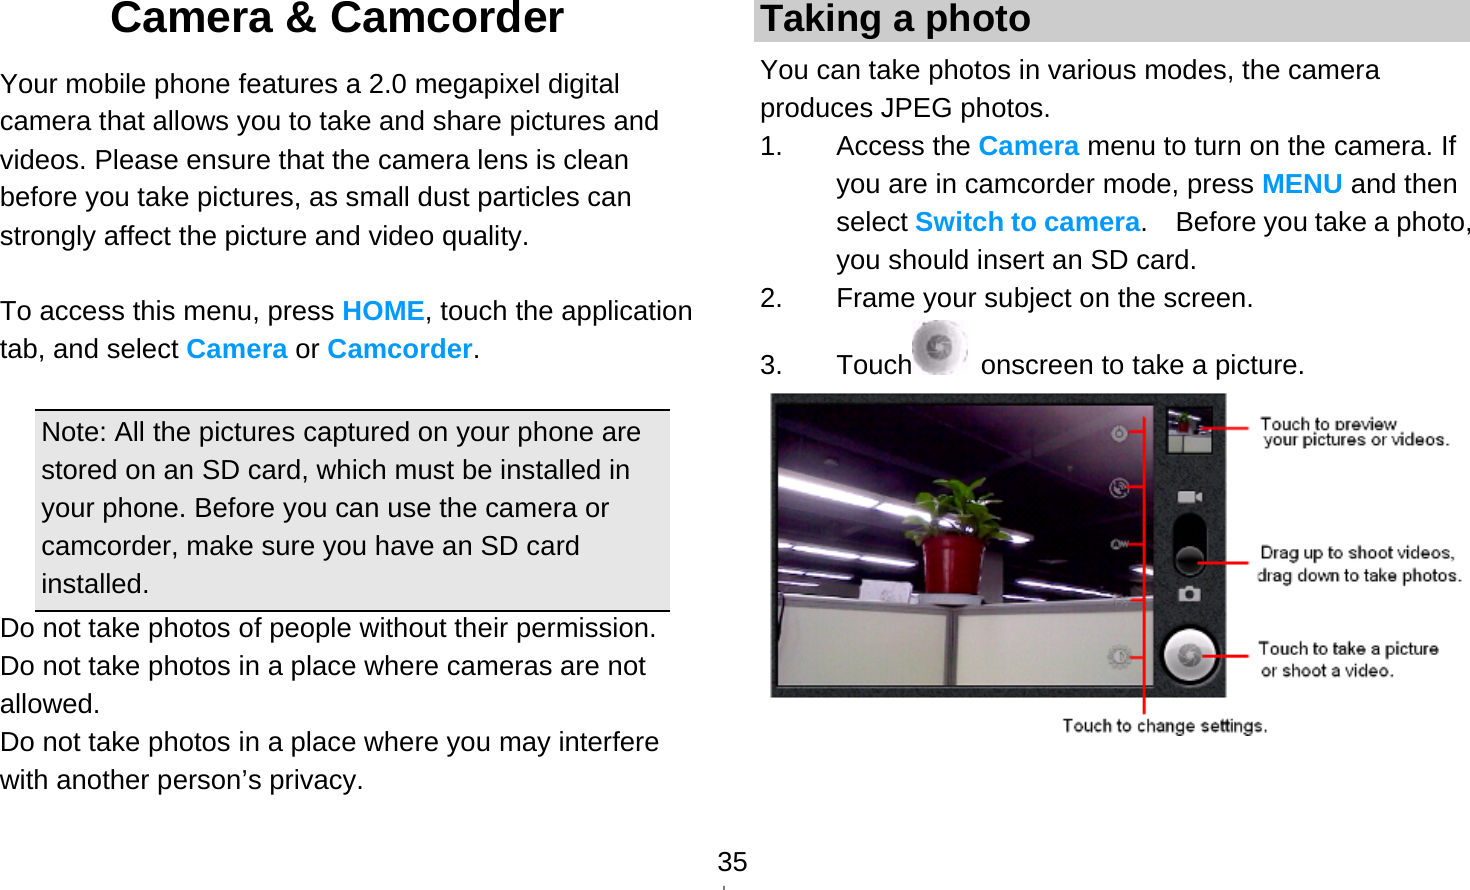   35Camera &amp; Camcorder   Your mobile phone features a 2.0 megapixel digital camera that allows you to take and share pictures and videos. Please ensure that the camera lens is clean before you take pictures, as small dust particles can strongly affect the picture and video quality.  To access this menu, press HOME, touch the application tab, and select Camera or Camcorder.  Note: All the pictures captured on your phone are stored on an SD card, which must be installed in your phone. Before you can use the camera or camcorder, make sure you have an SD card installed. Do not take photos of people without their permission. Do not take photos in a place where cameras are not allowed. Do not take photos in a place where you may interfere with another person’s privacy. Taking a photo You can take photos in various modes, the camera produces JPEG photos. 1. Access the Camera menu to turn on the camera. If you are in camcorder mode, press MENU and then select Switch to camera.    Before you take a photo, you should insert an SD card. 2.  Frame your subject on the screen. 3. Touch   onscreen to take a picture.   